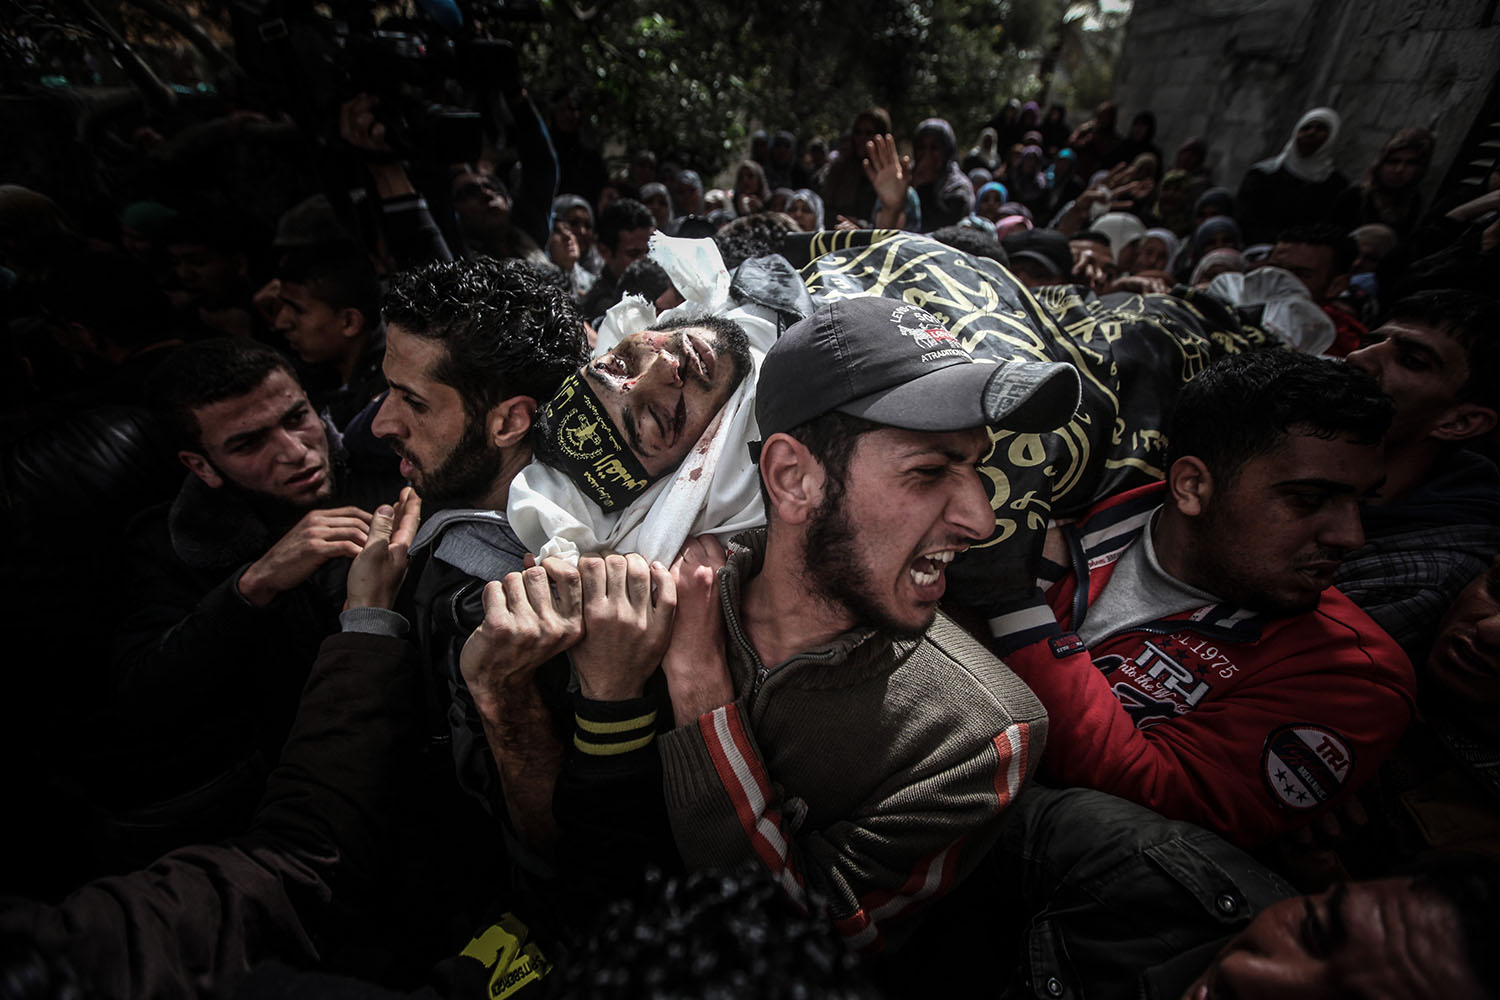 Mar. 4,  2014. Palestinians carry the body of Musab Za'anin, who was killed in an Israeli airstrike, during his funeral in Beit Hanoun in the northern Gaza Strip.